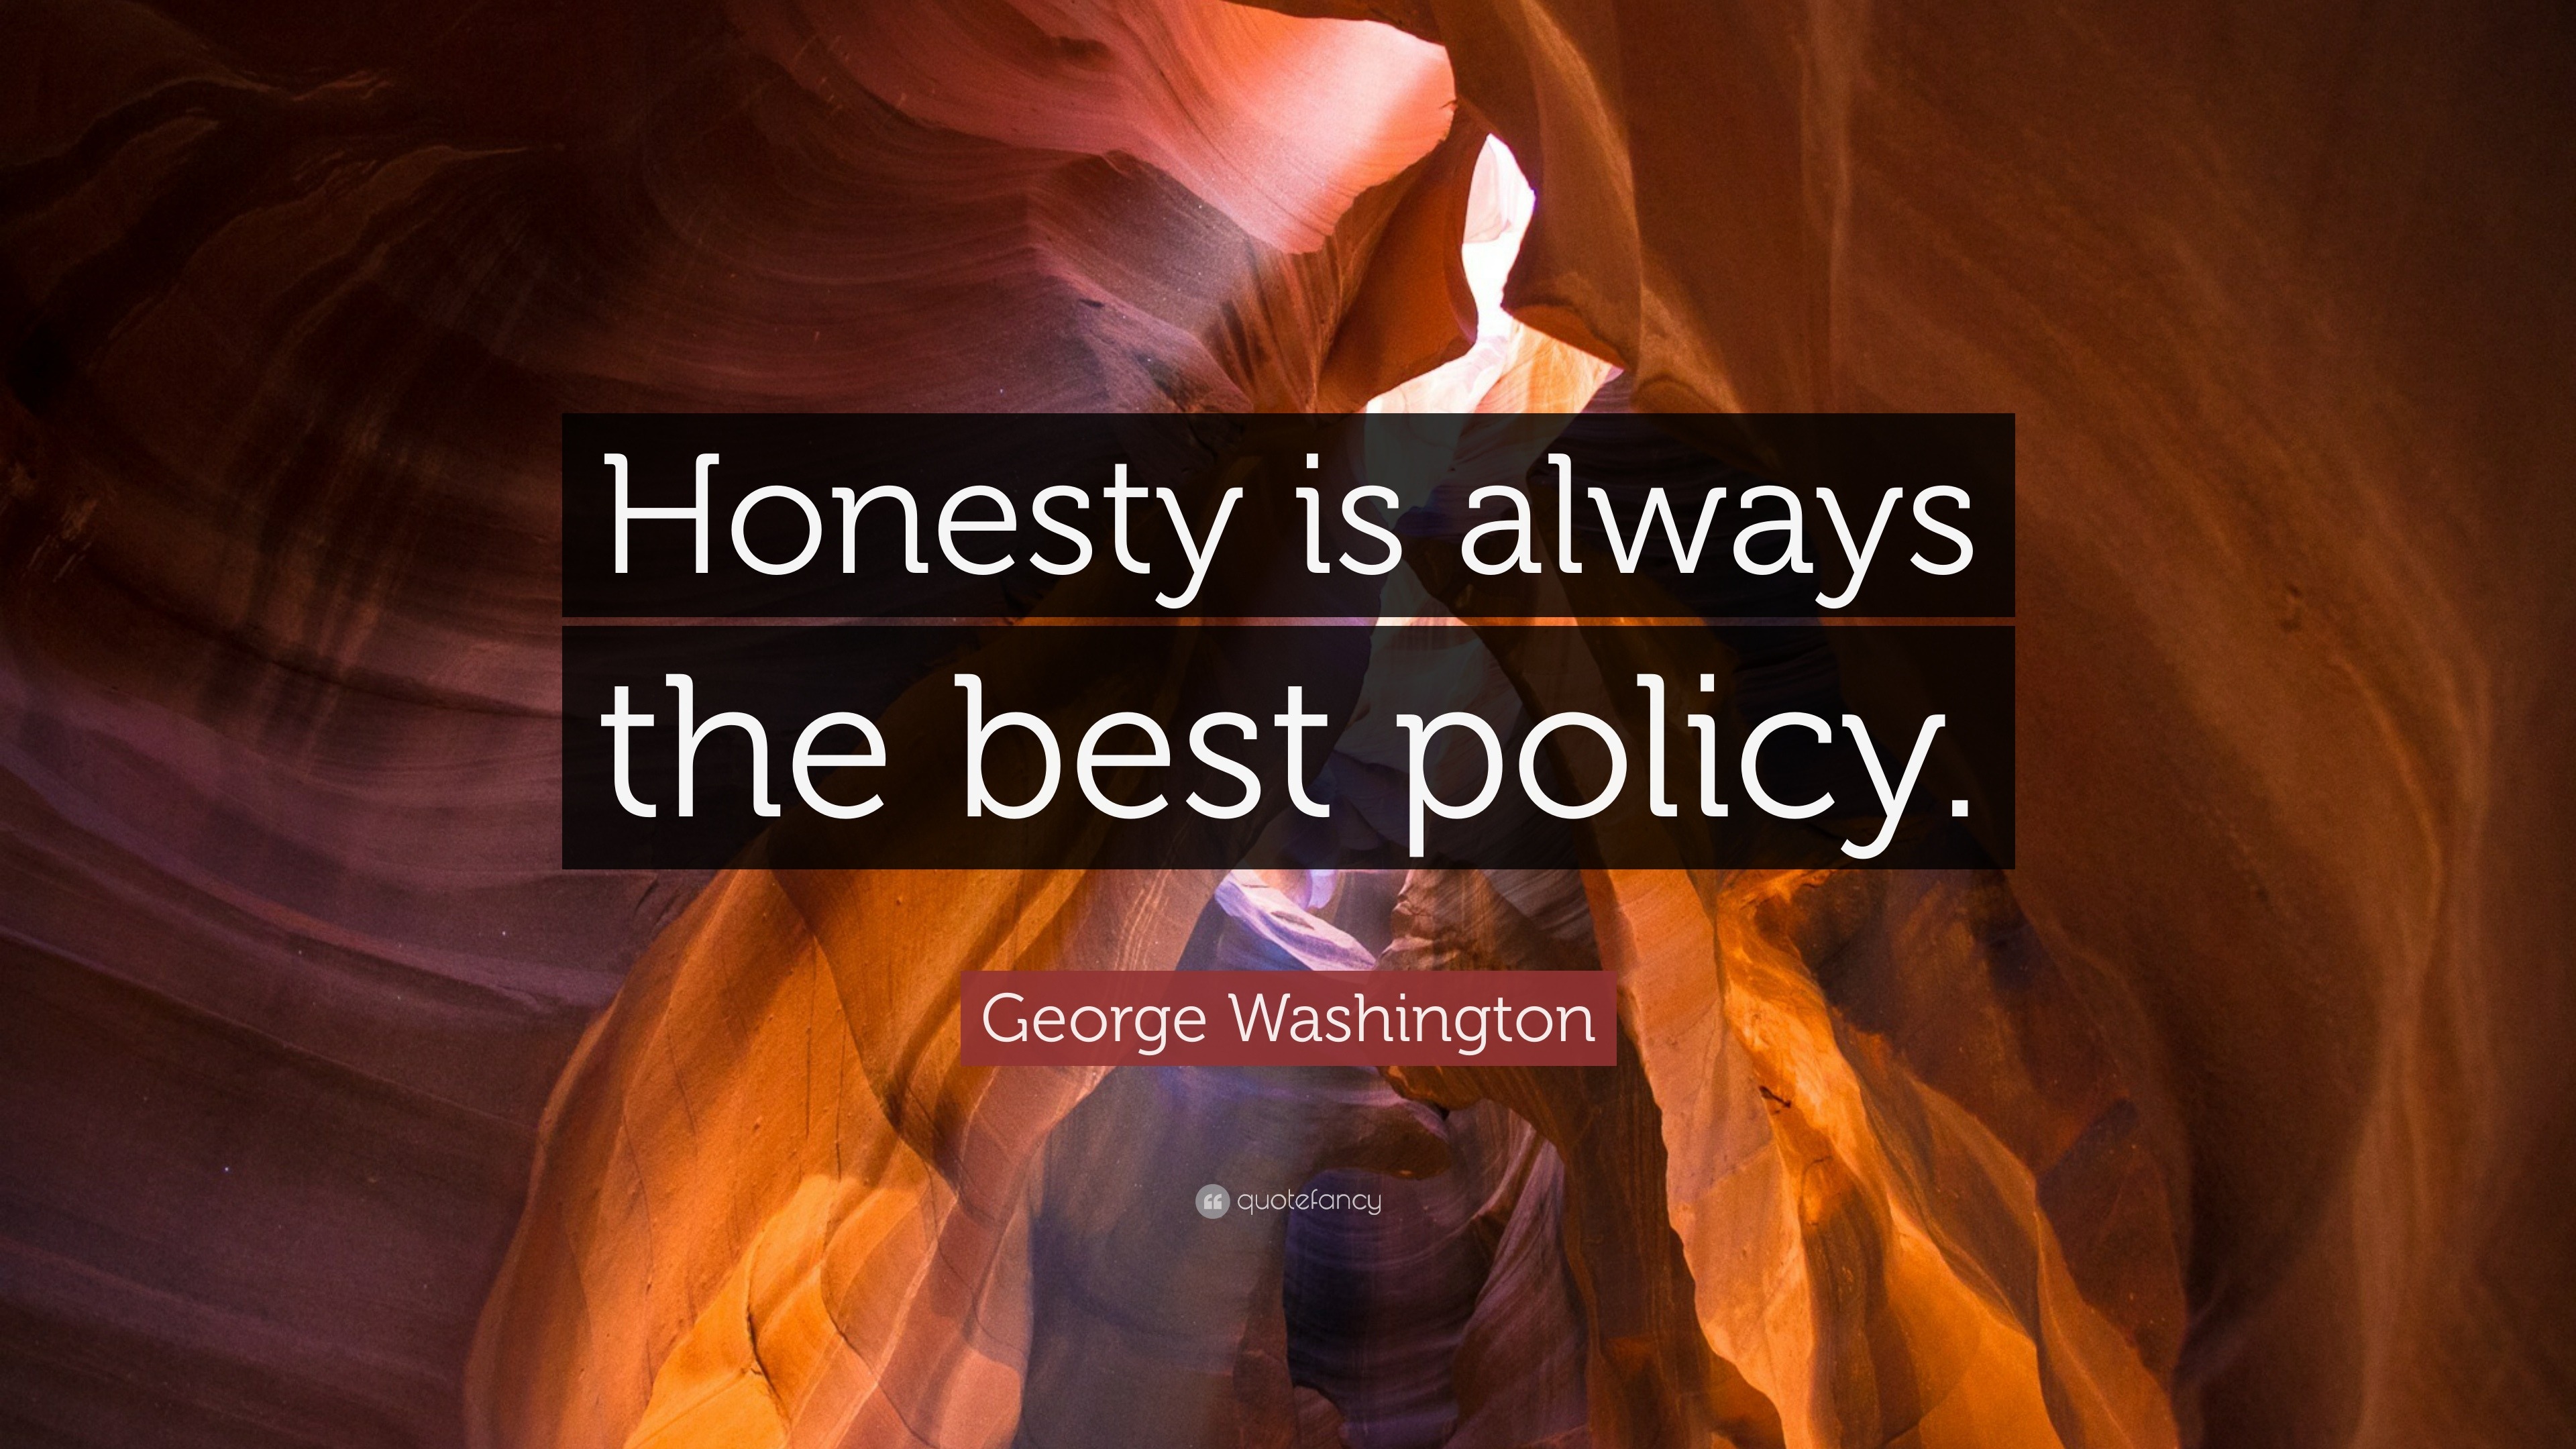 george-washington-quote-honesty-is-always-the-best-policy